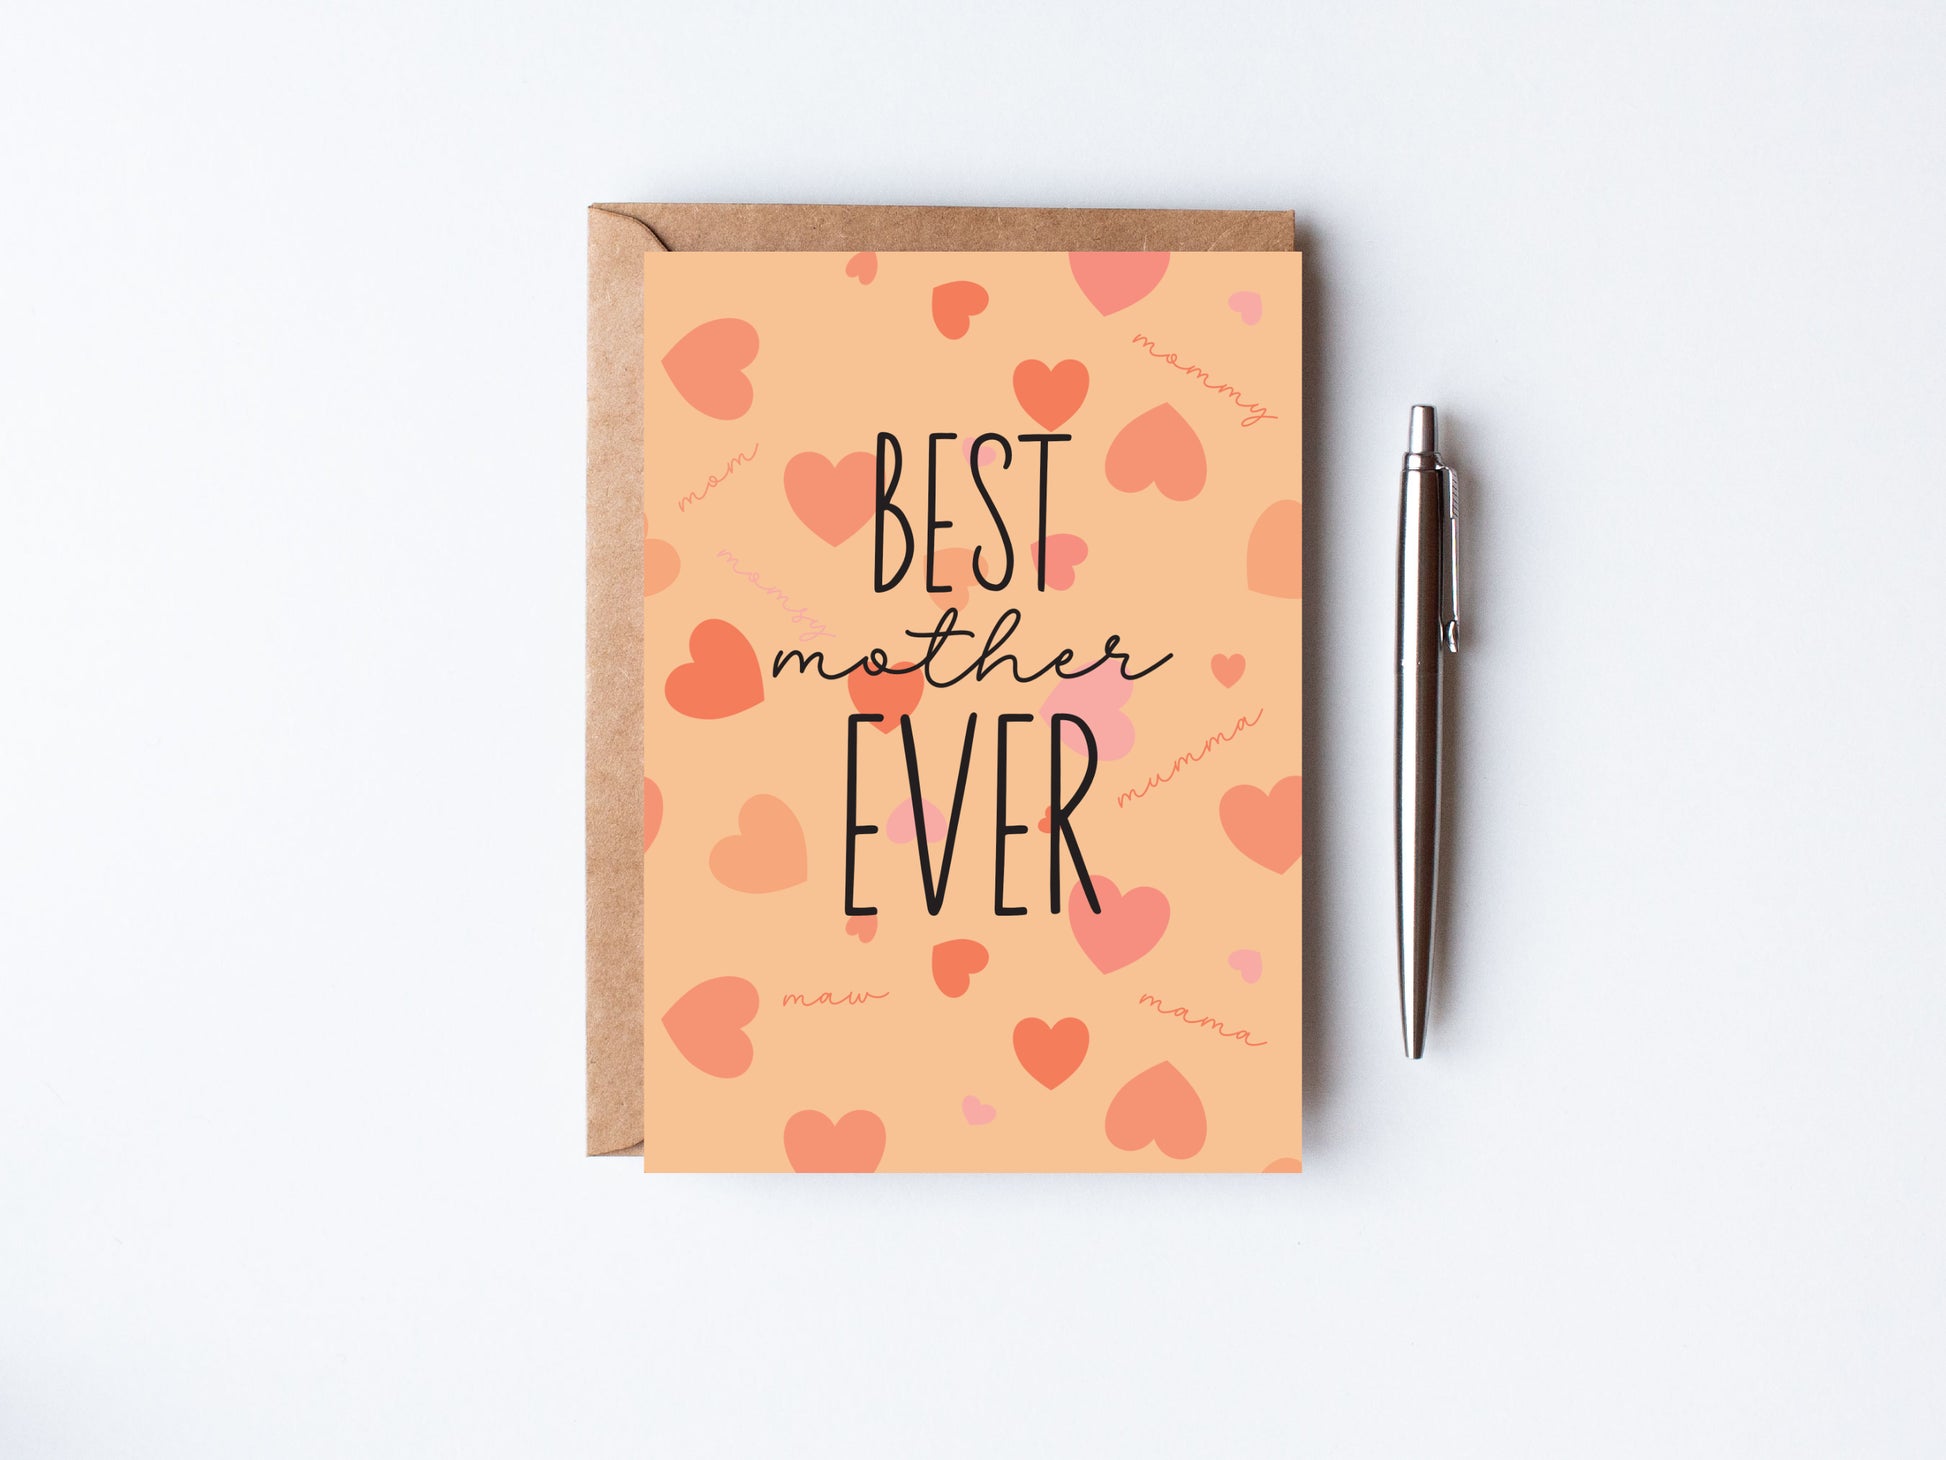 Colourful Best Mother ever greeting card - momma, maw, mom, mommy with hearts